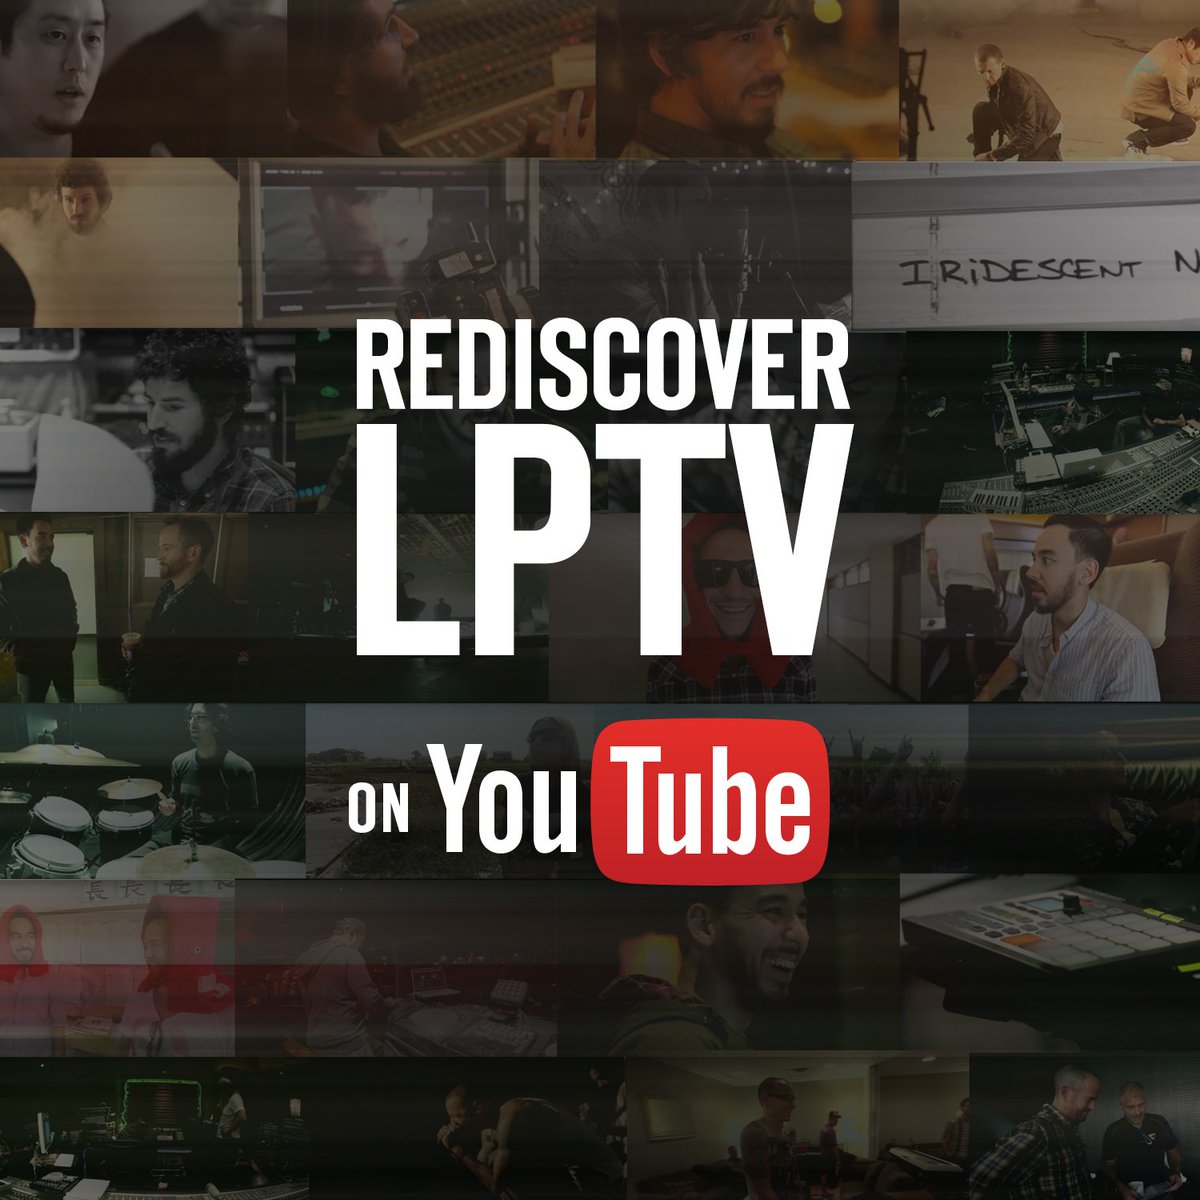 Rediscover #LPTV on @YouTube, now organized by season from 2003 - 2015. Watch: https://t.co/6DZEXgZq2Q https://t.co/09JWZMdTAo